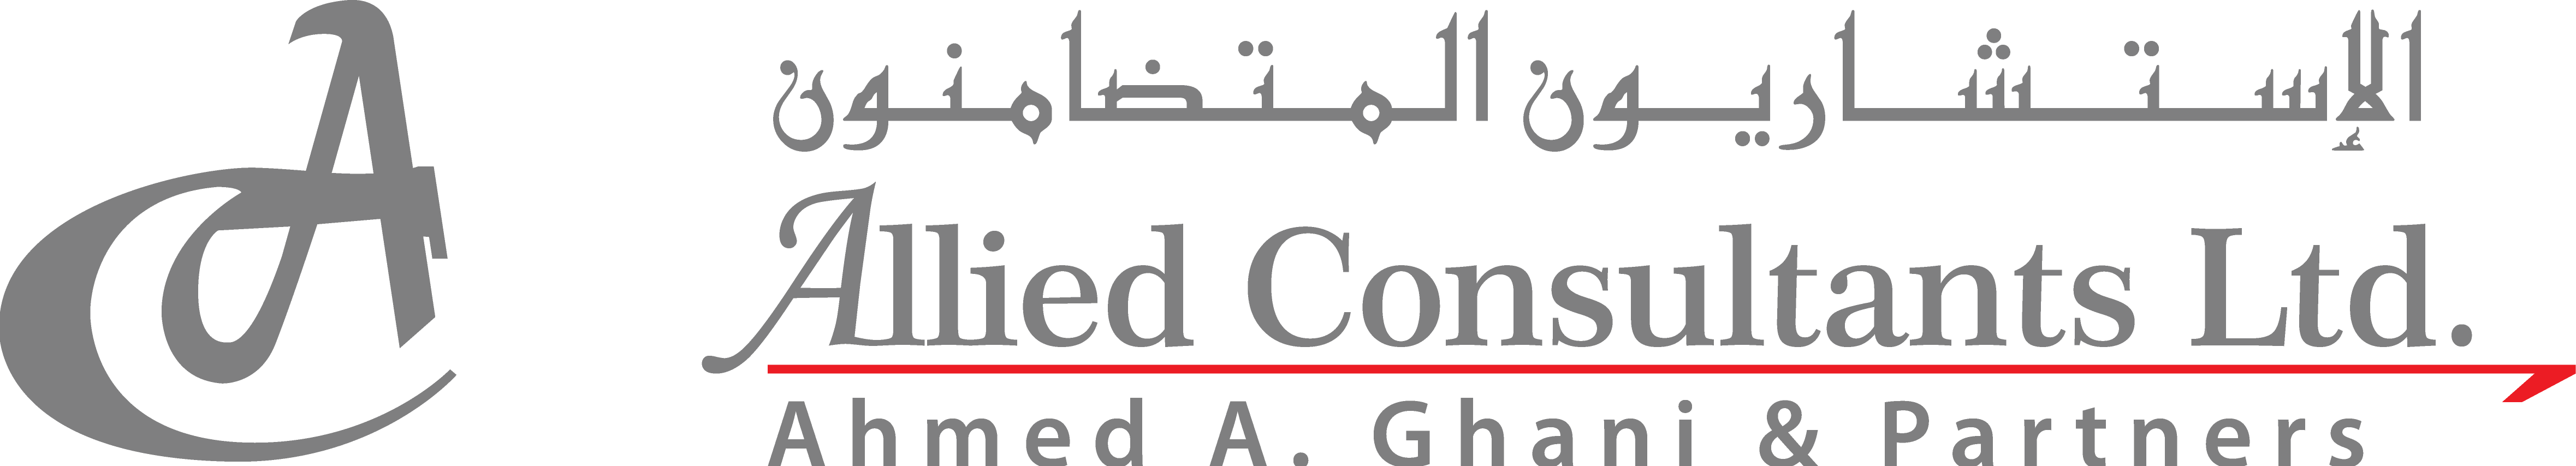 Allied Consultants